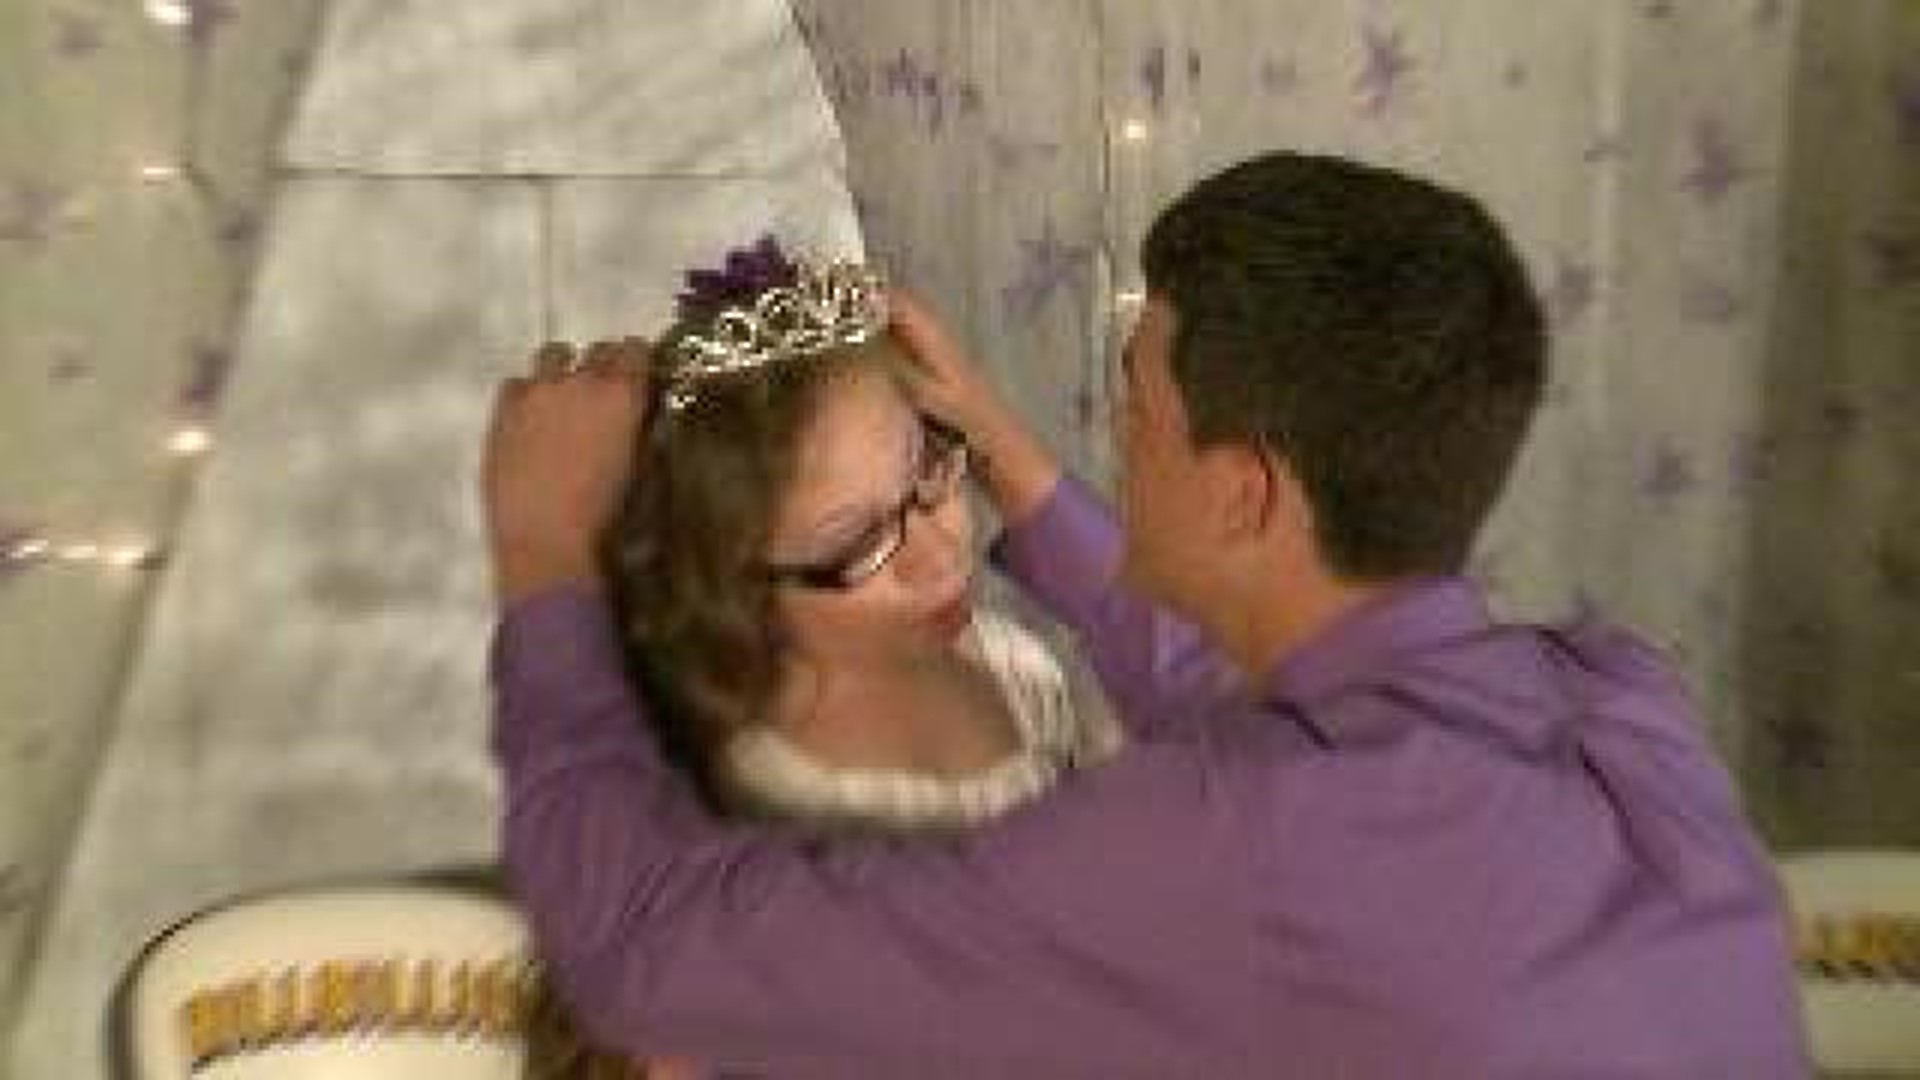 Community Plans Surprise Prom for Young Girl